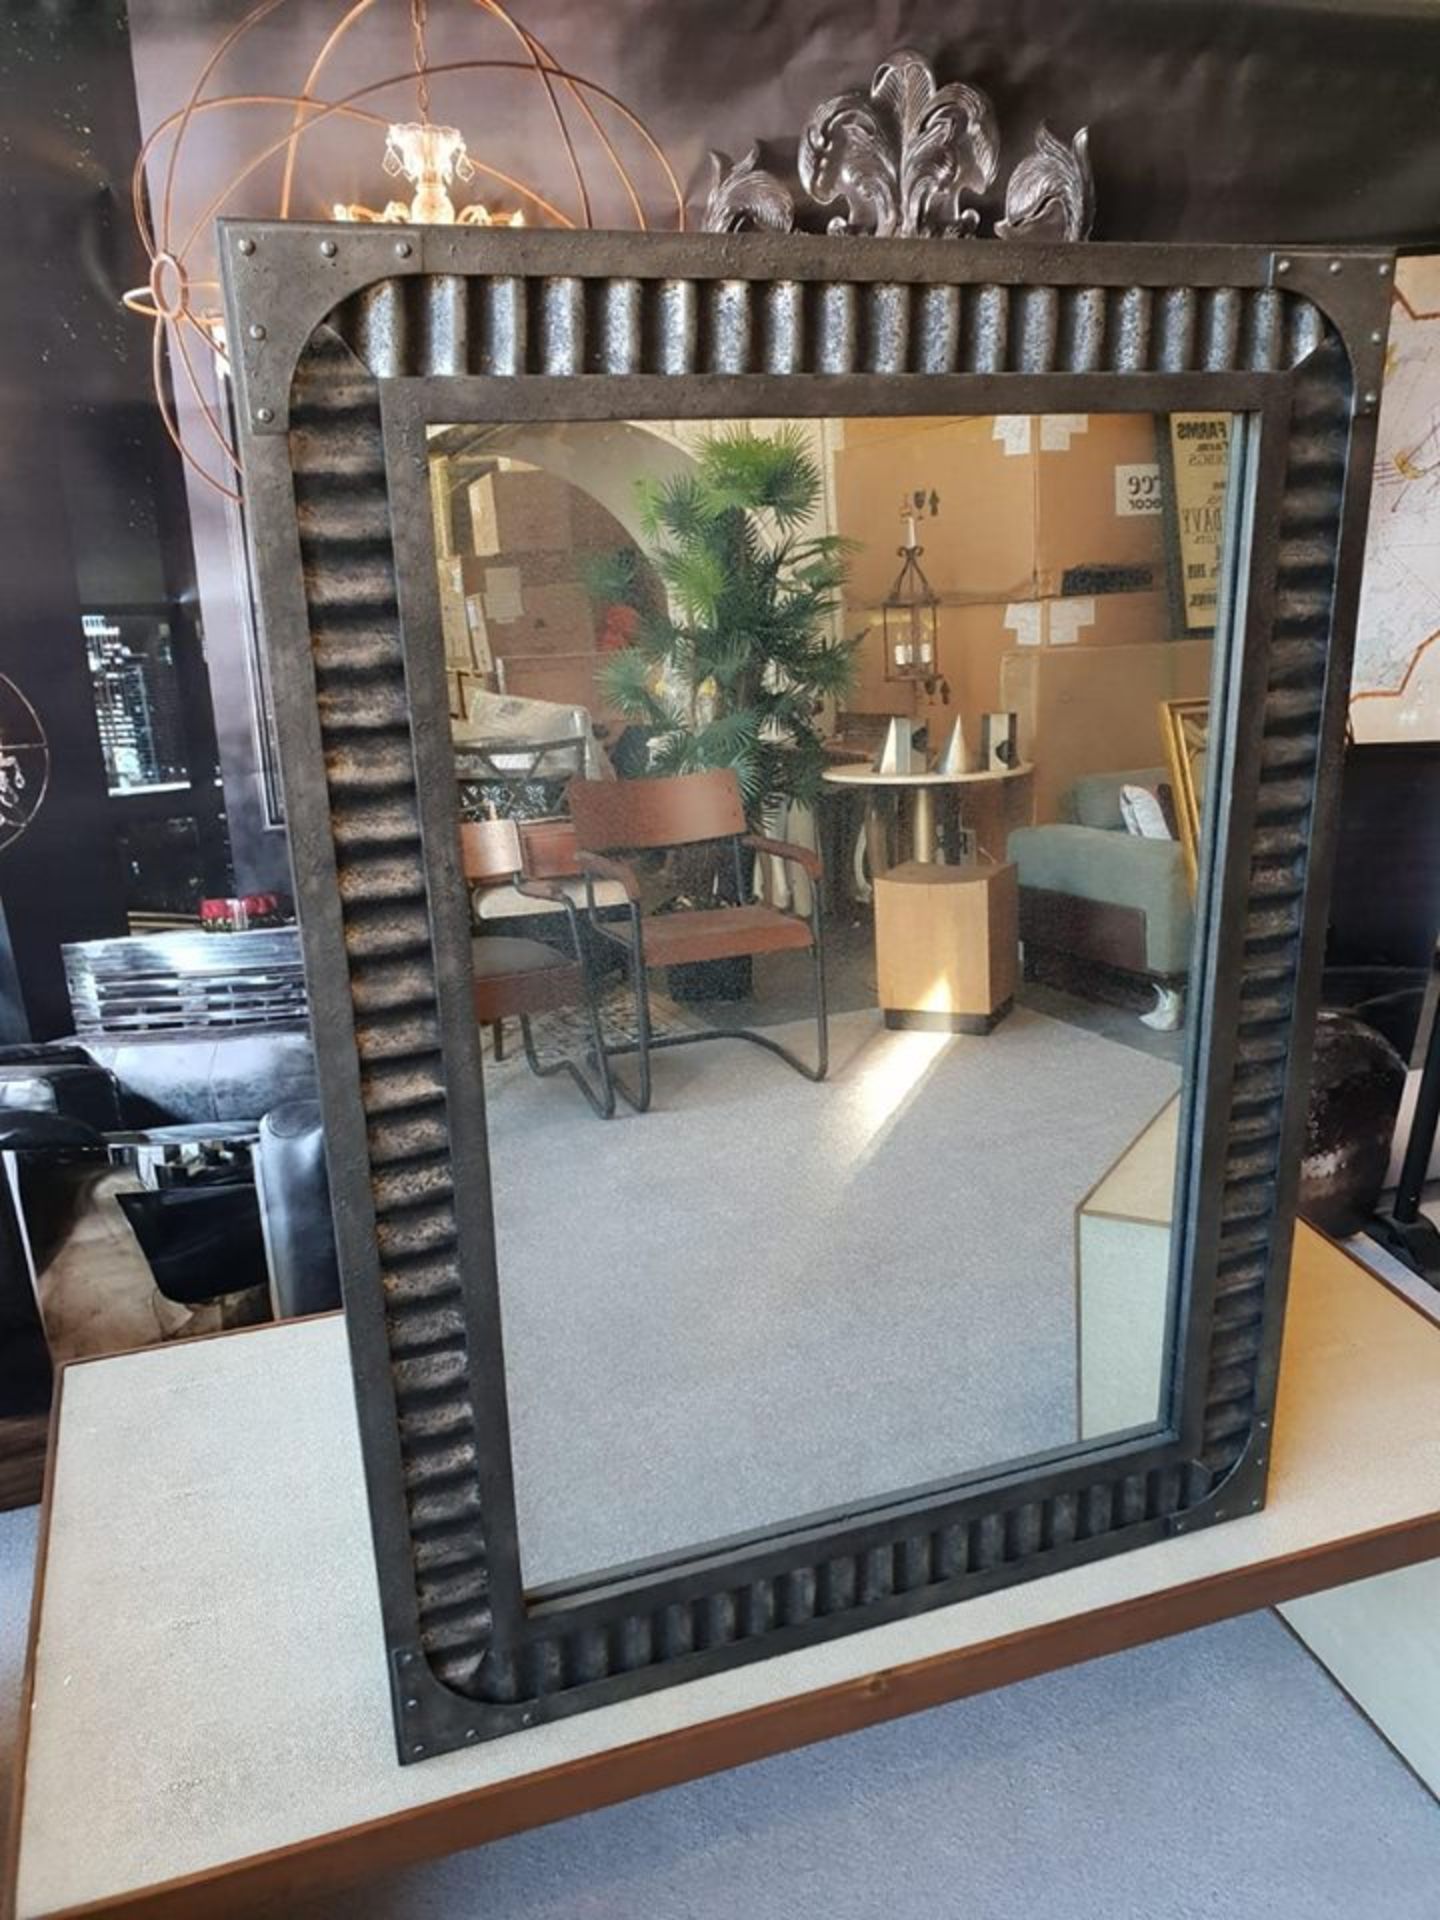 Jawa Floor Mirror Iron Frame With Corrugated Sheet Metal And Antiqued Mirror Plate 106.7 x 3.8 x